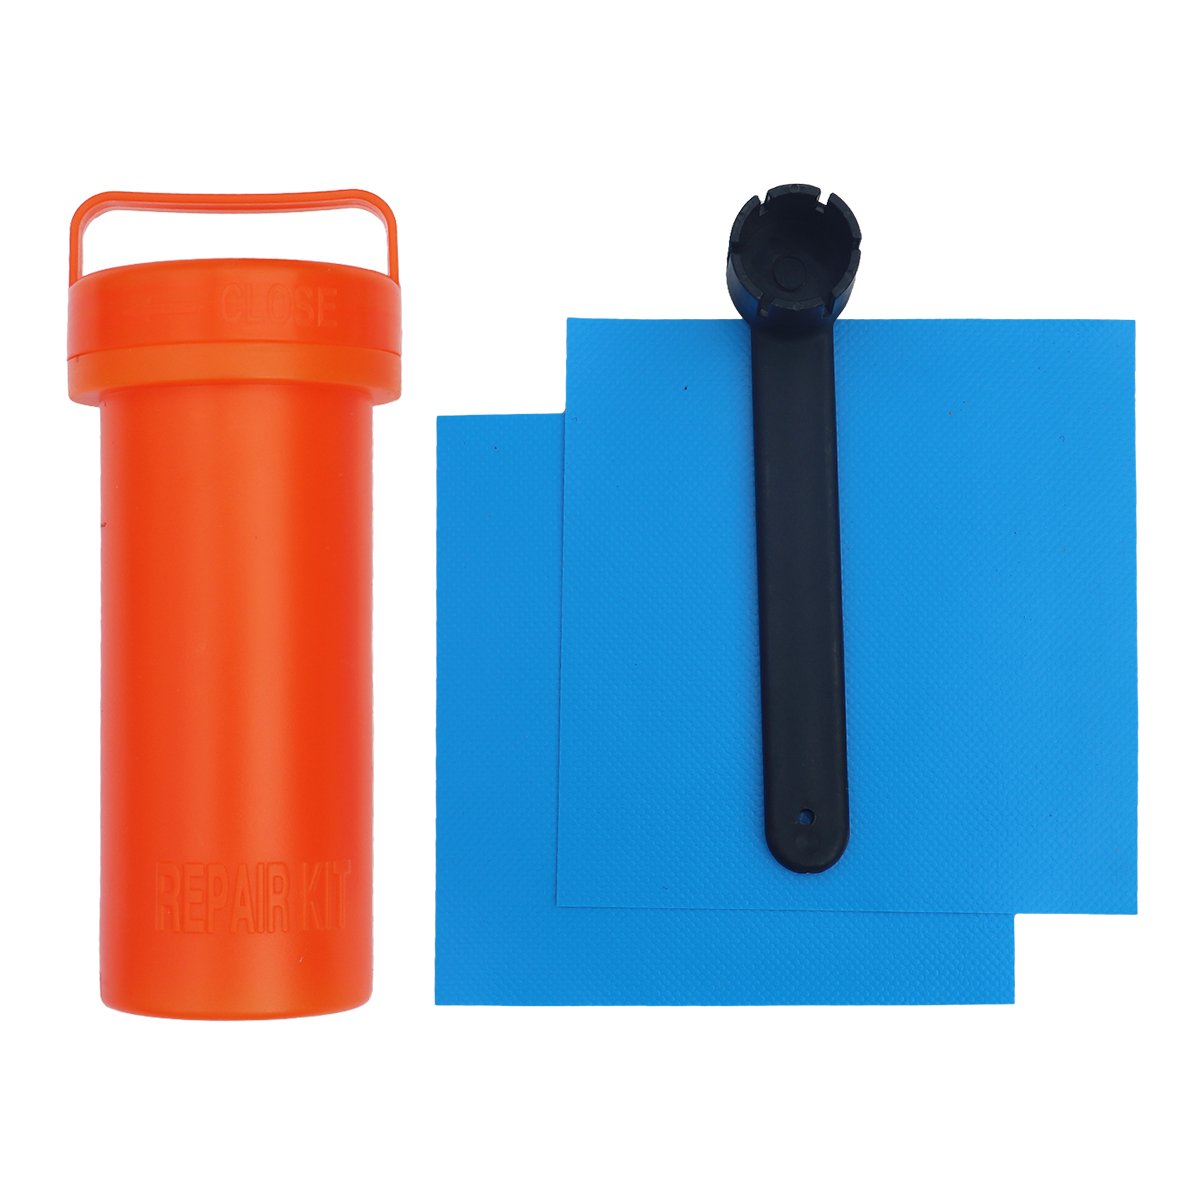 Kahuna Hana Repair Kit for Stand Up Paddle Boards 1